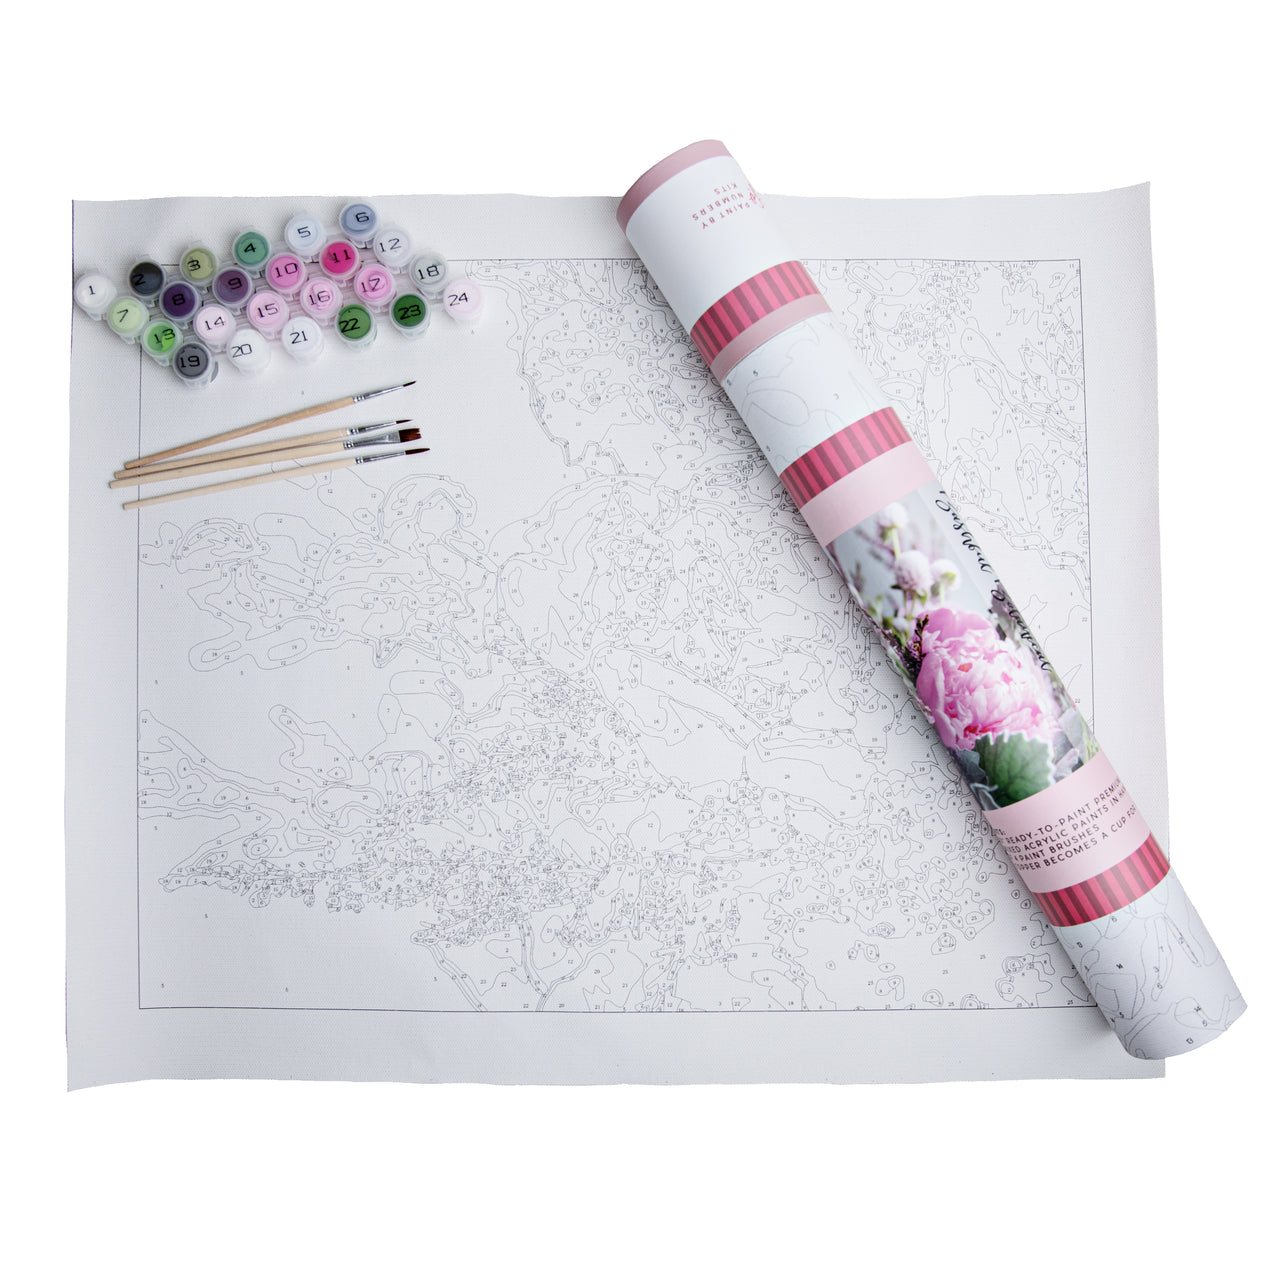 Mini Adult Paint-By-Numbers Kit  Anthropologie Japan - Women's